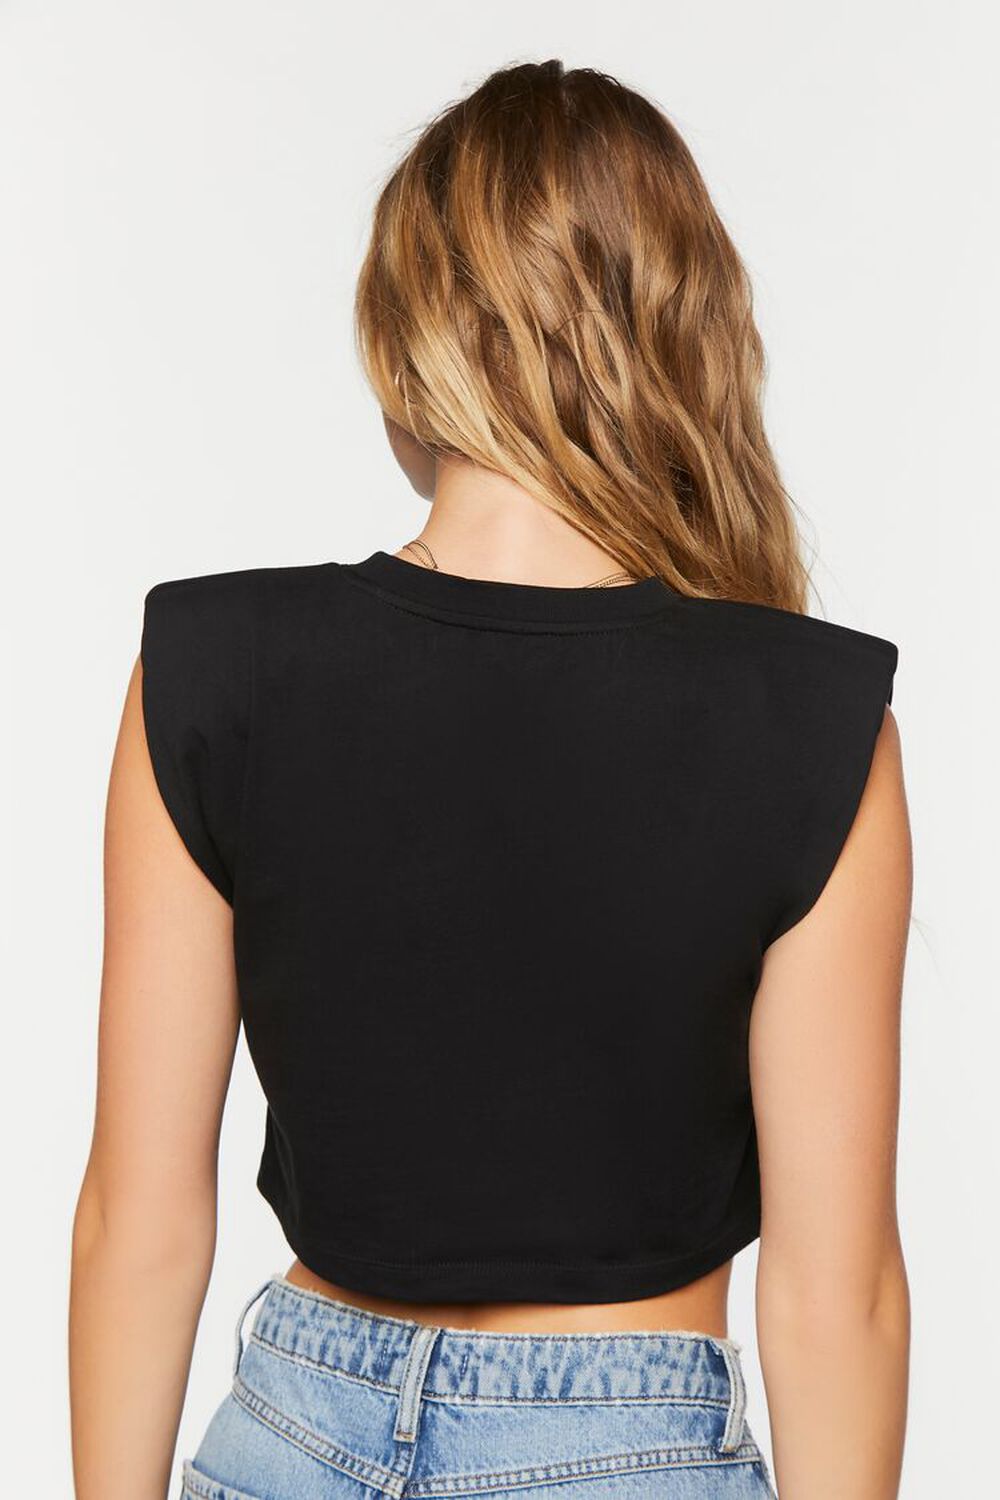 BLACK Cropped Muscle Tee, image 3